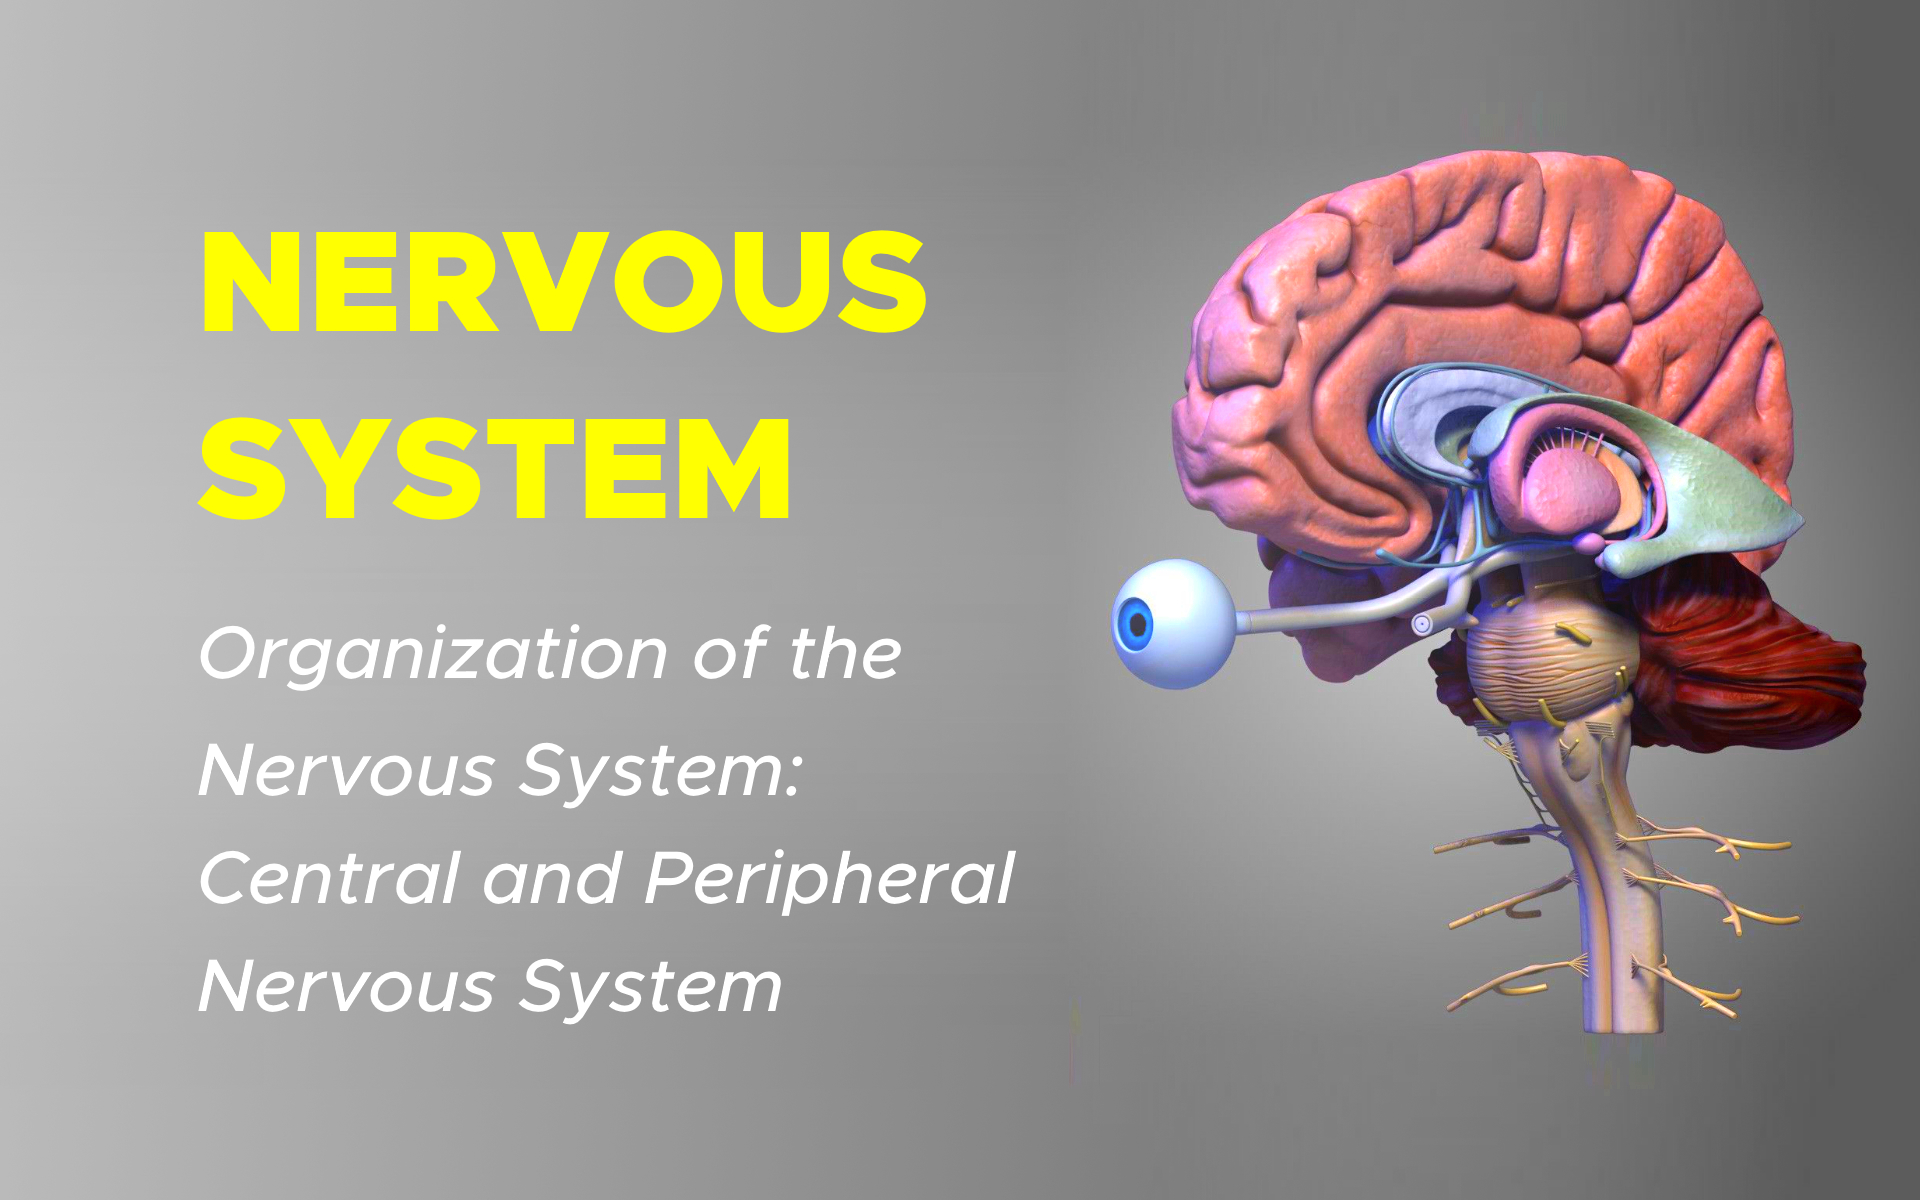 Nervous System 2 Organization of the Nervous System: Central and Peripheral Nervous System